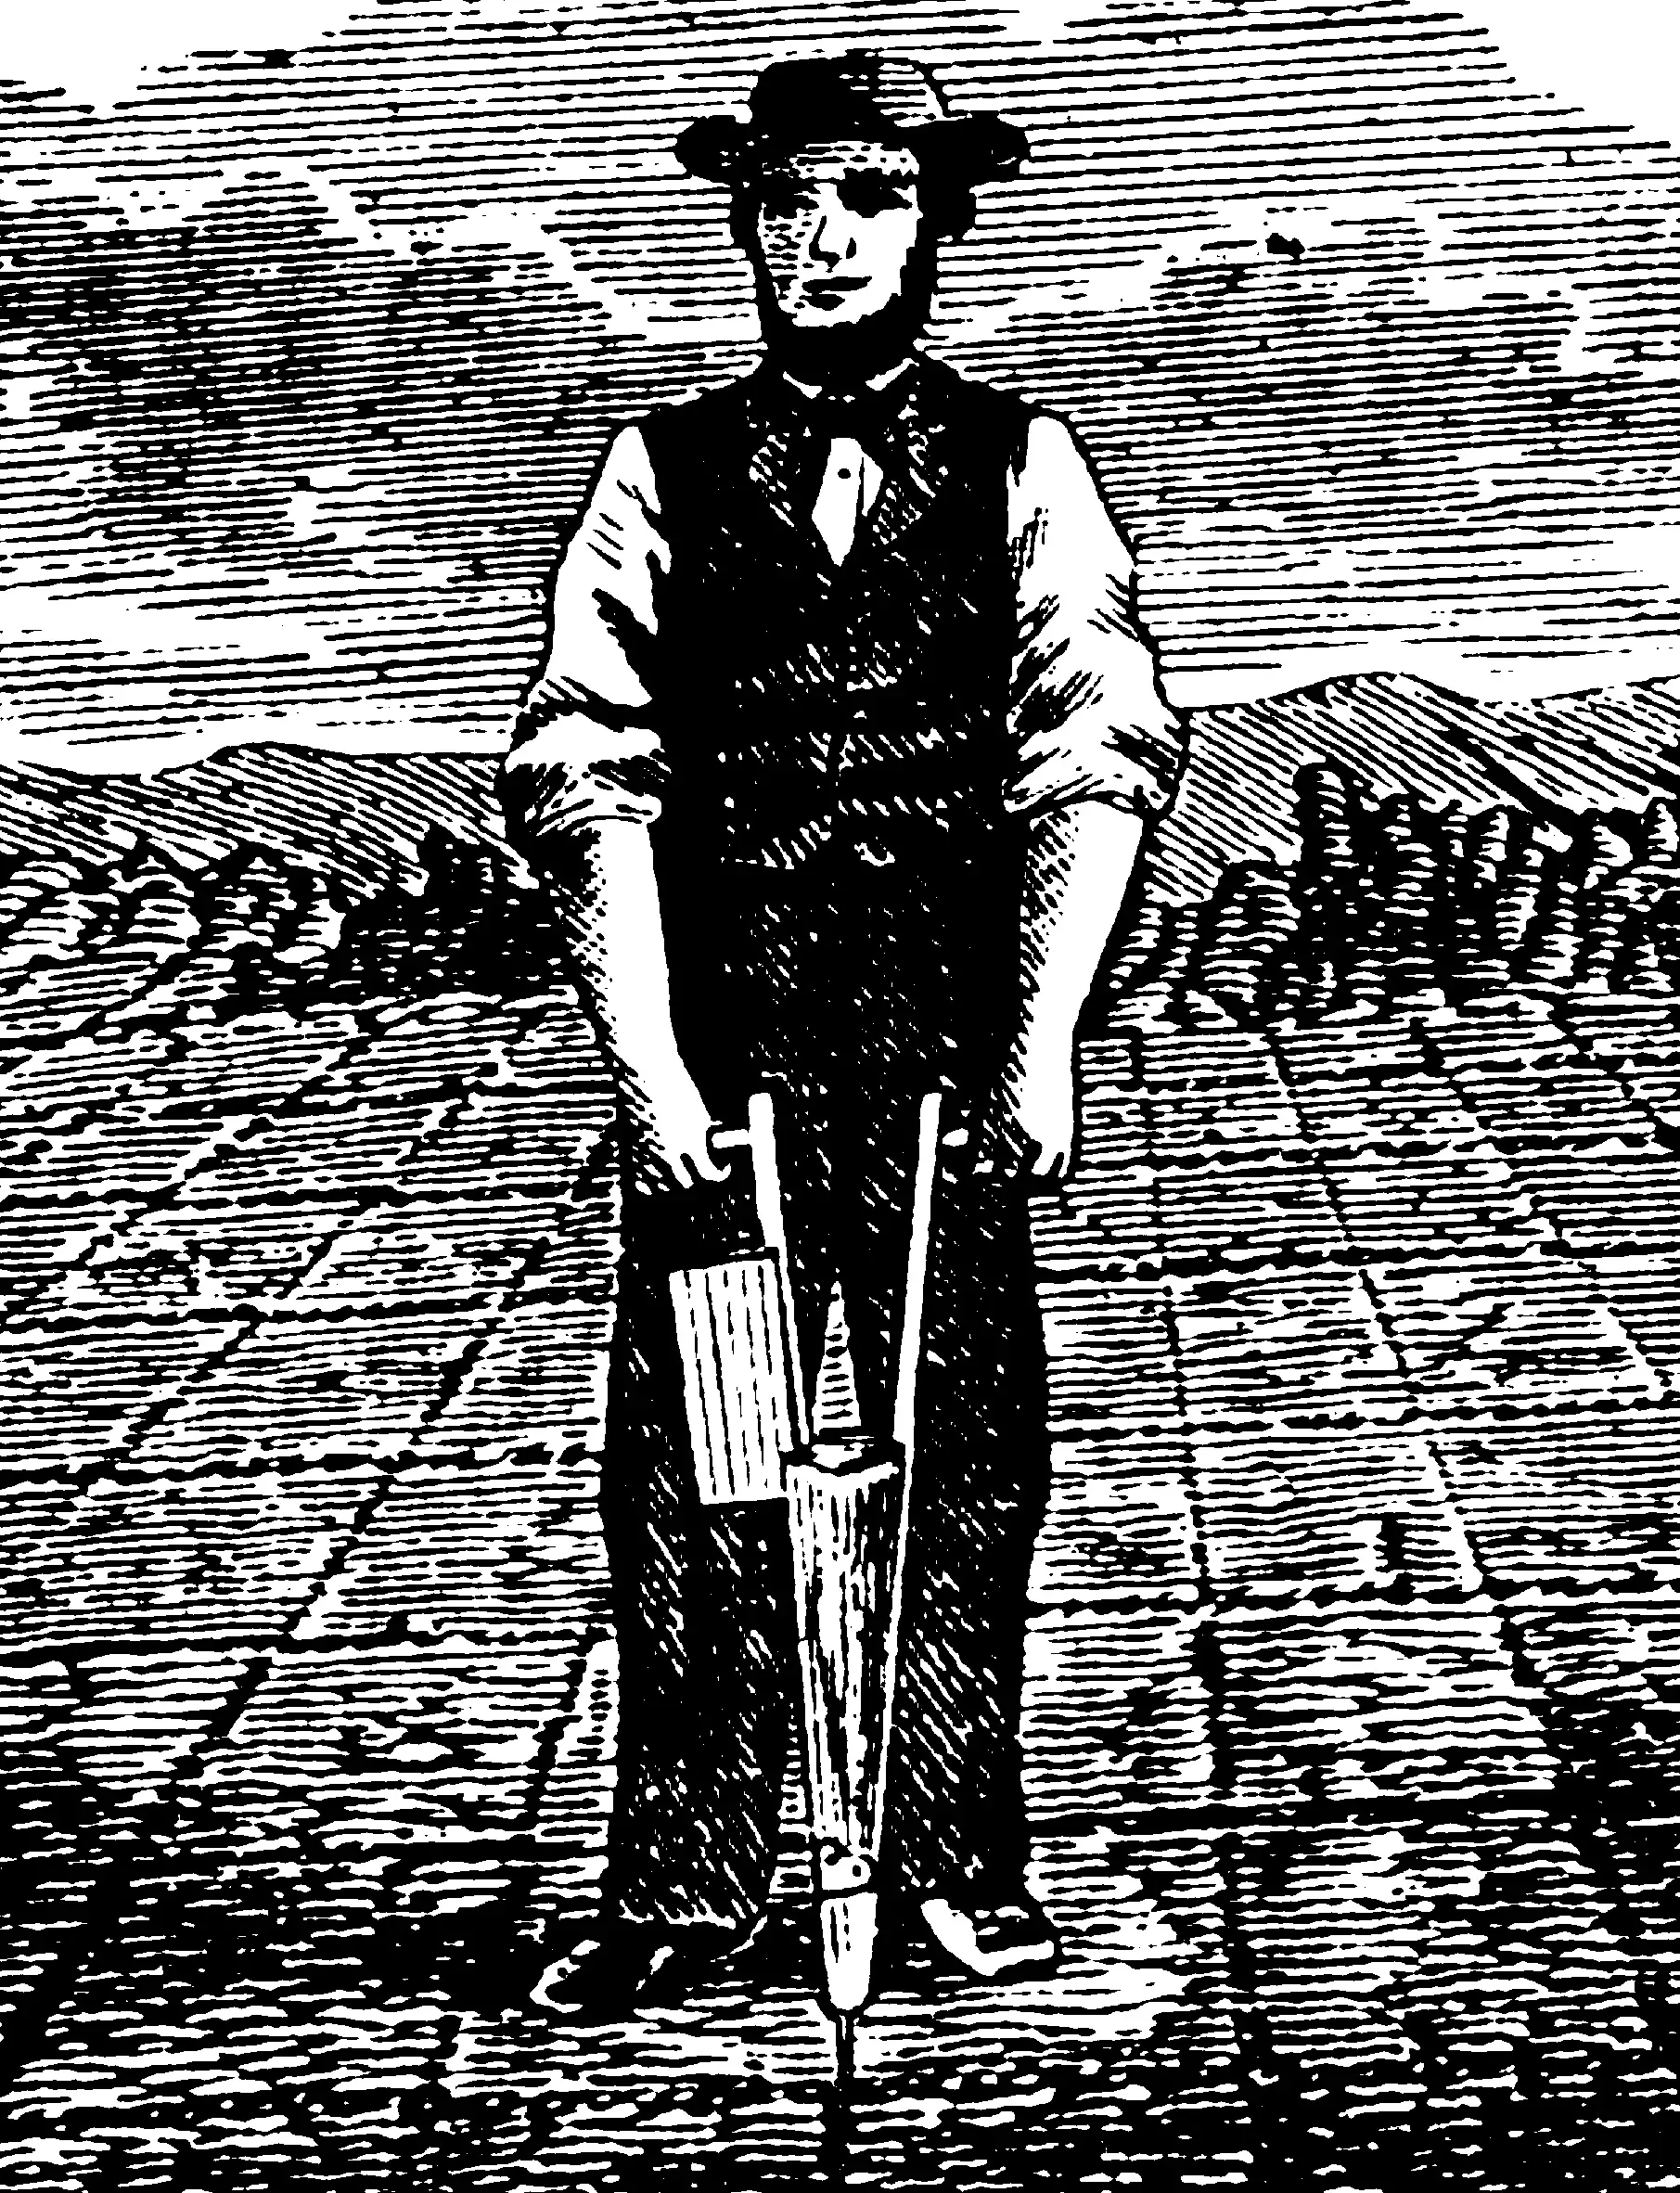 An illustration of a farmer with both hands on a hand-corn-planting device.